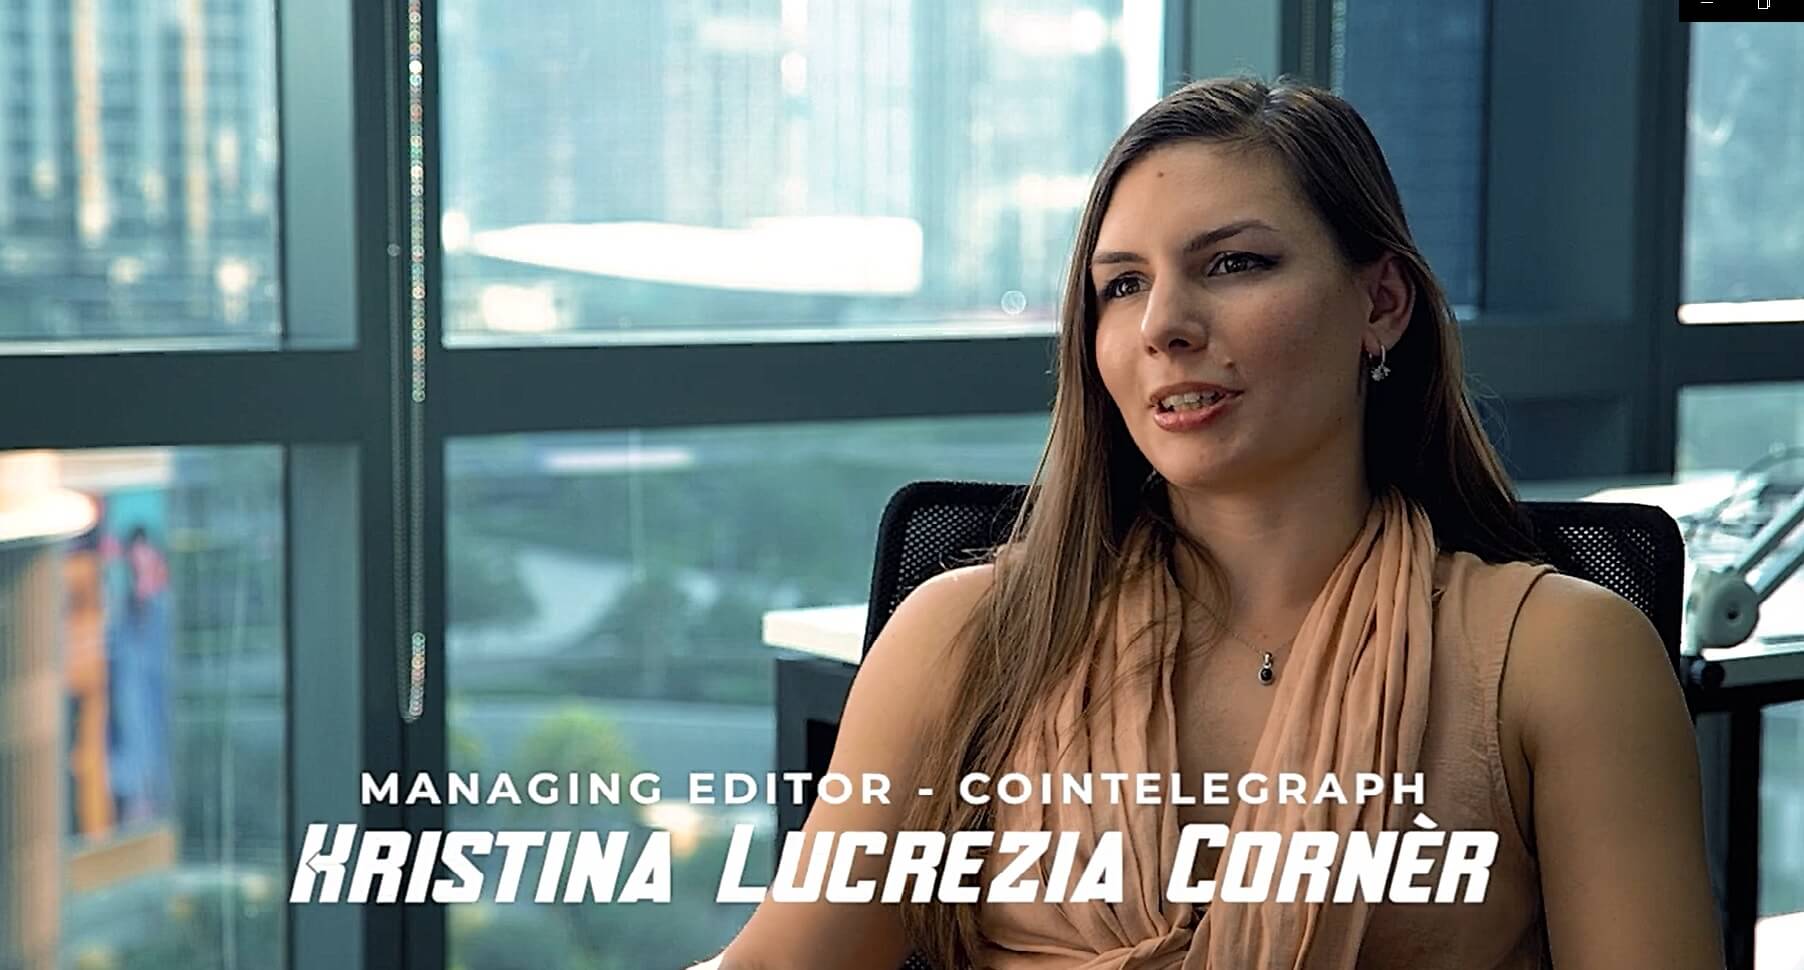 This is what Cointelegraph’s Kristina Lucrezia Cornèr finds MOST important in the crypto world